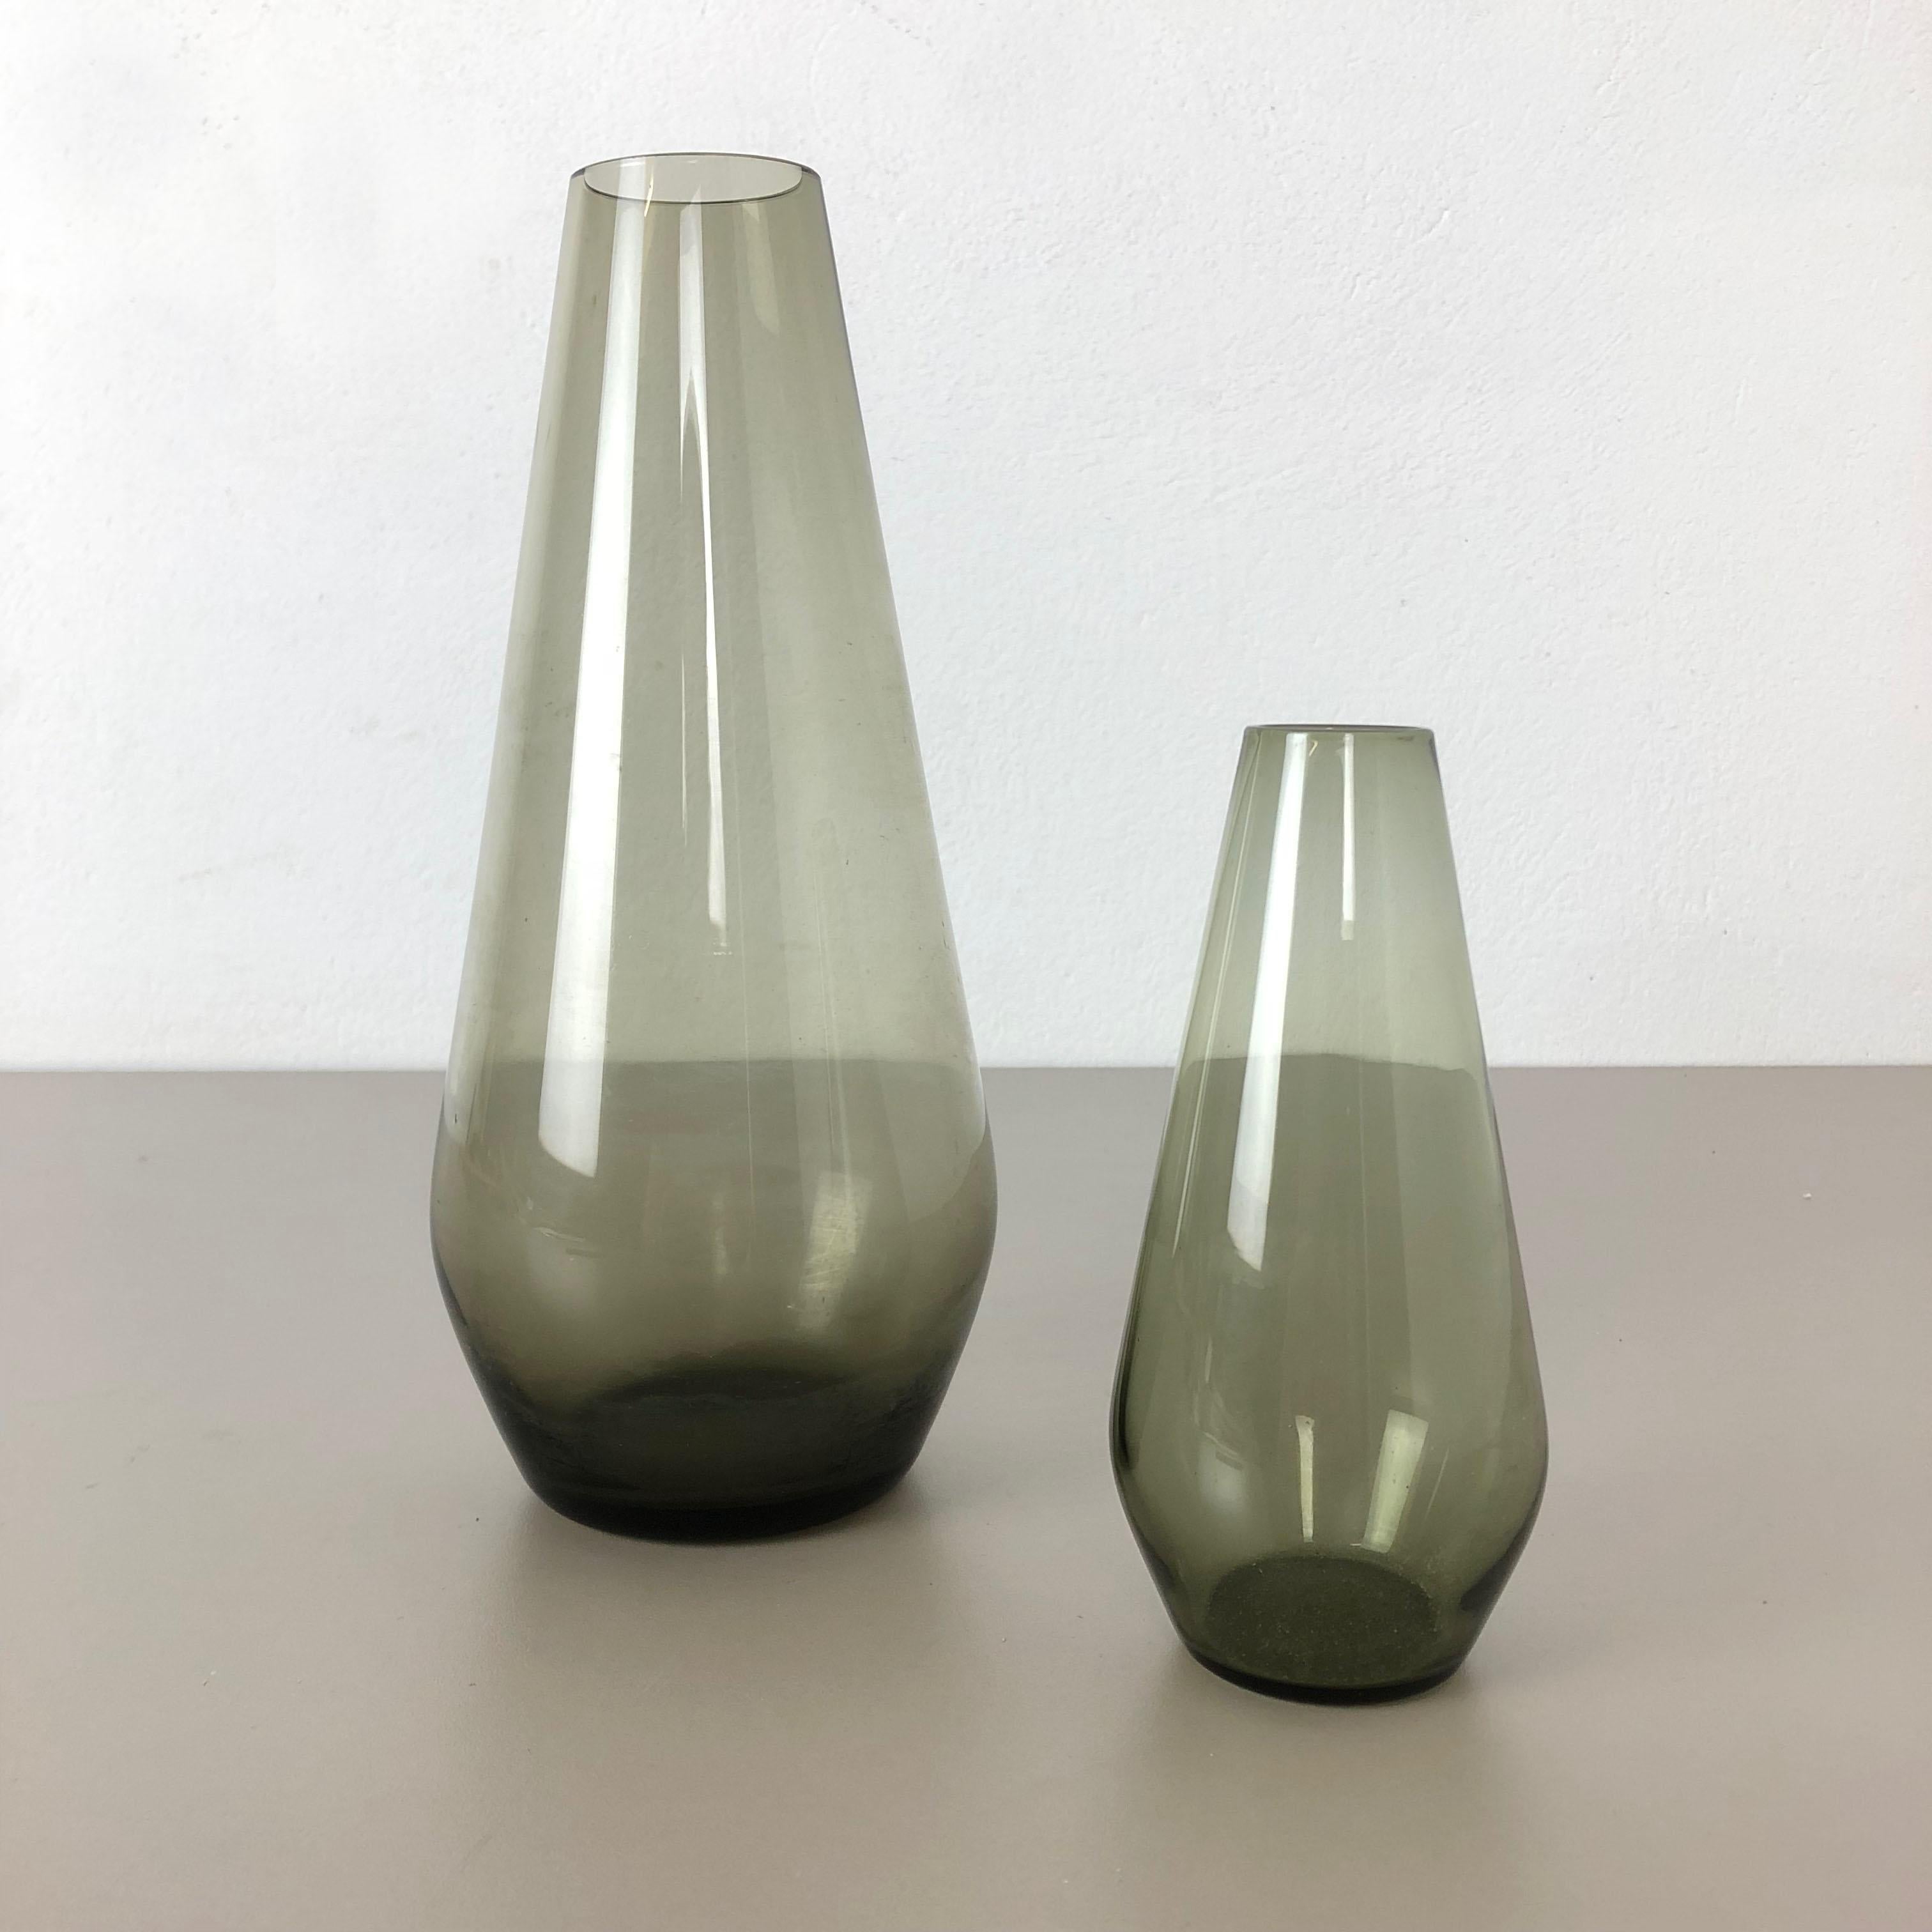 Article:

Set of 2 tourmaline vases


Producer:

WMF, Germany


Design:

Prof. Wilhelm Wagenfeld Bauhaus 



Decade:

1960s


Description:

Original vintage 1960s Set of 2 vases of the Wagenfeld tourmaline series. These two vase are designed by